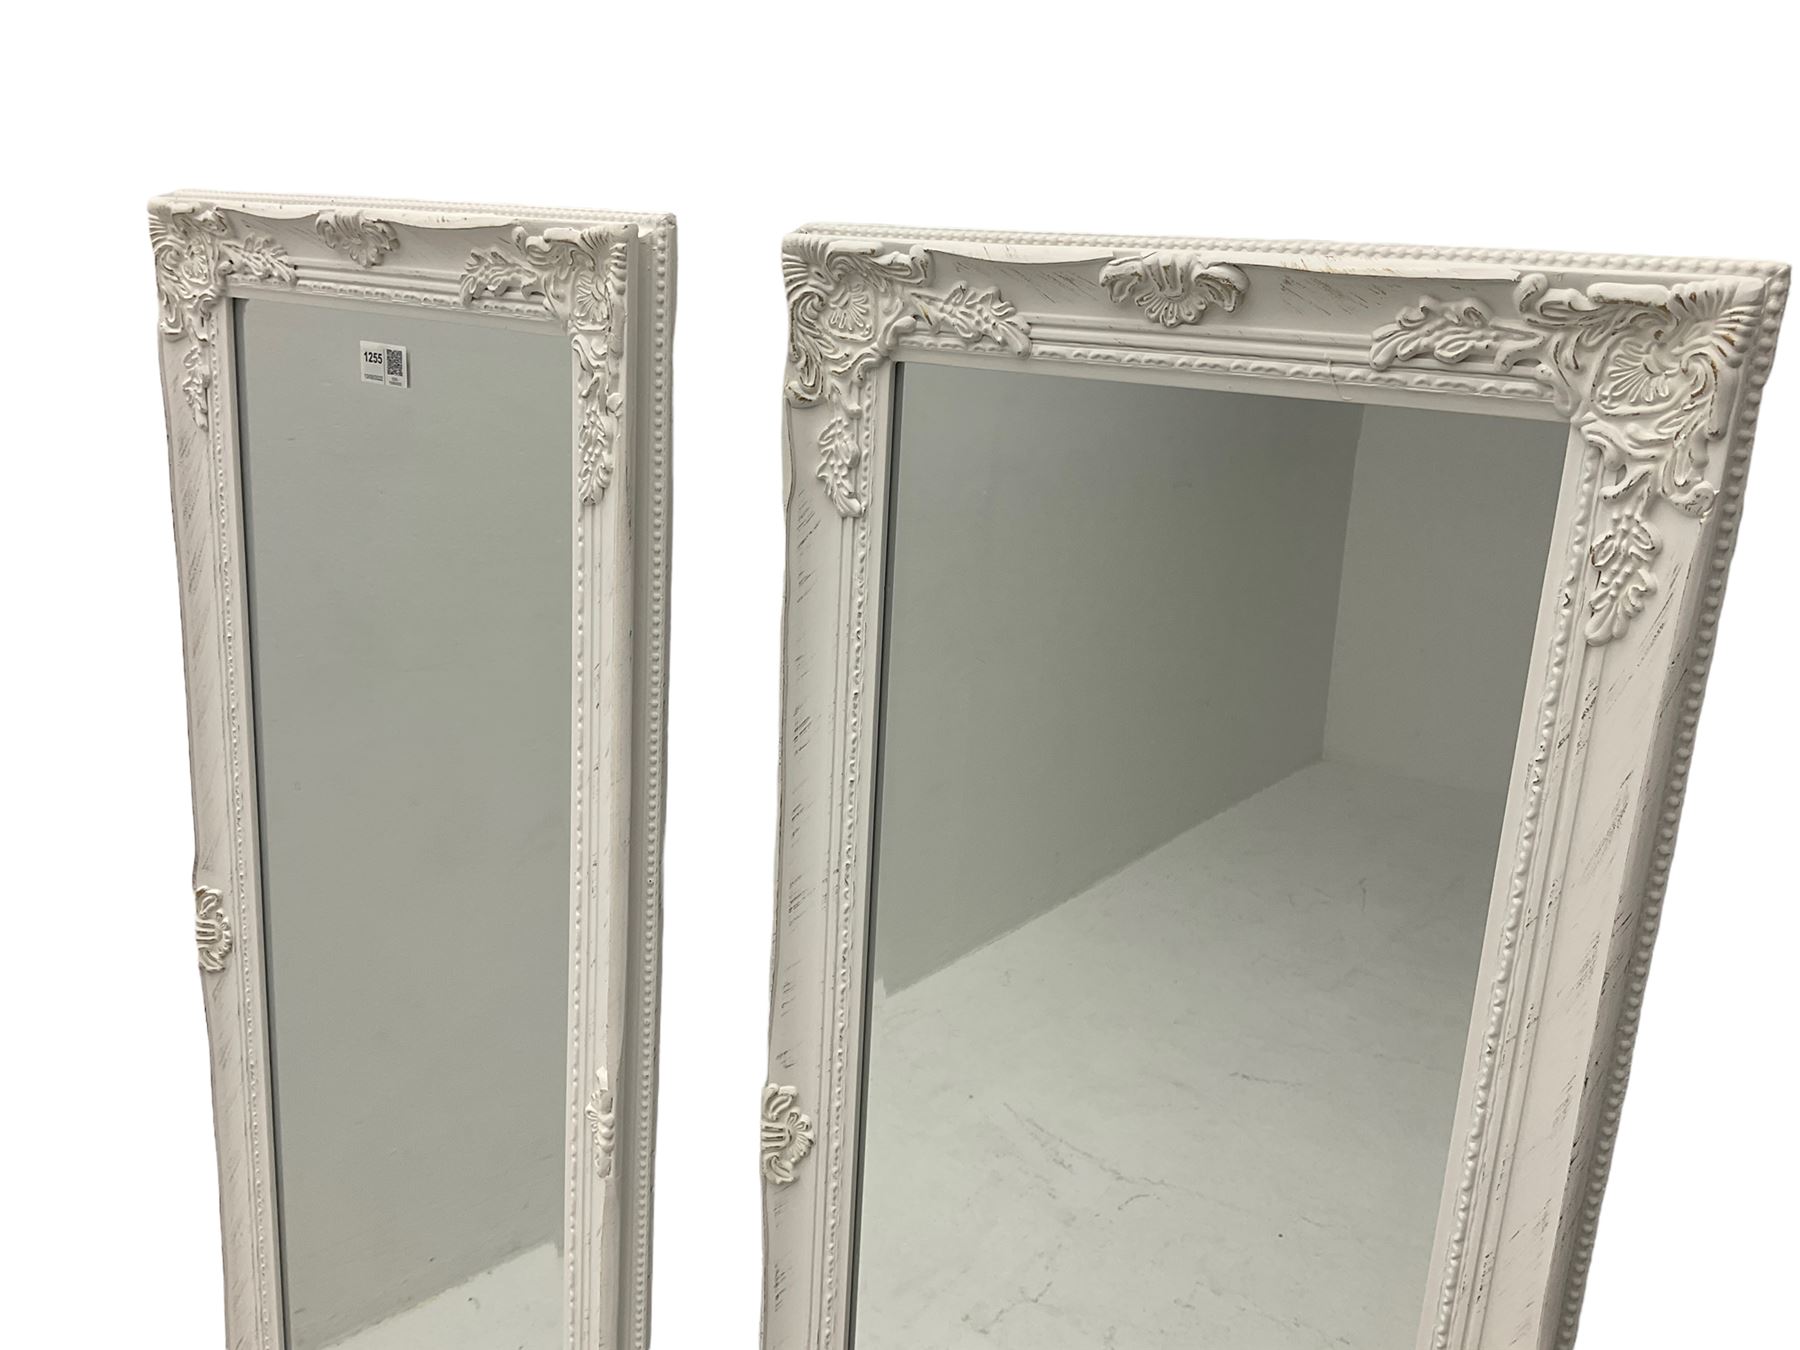 Pair of classical white painted rectangular wall mirror - Image 2 of 3